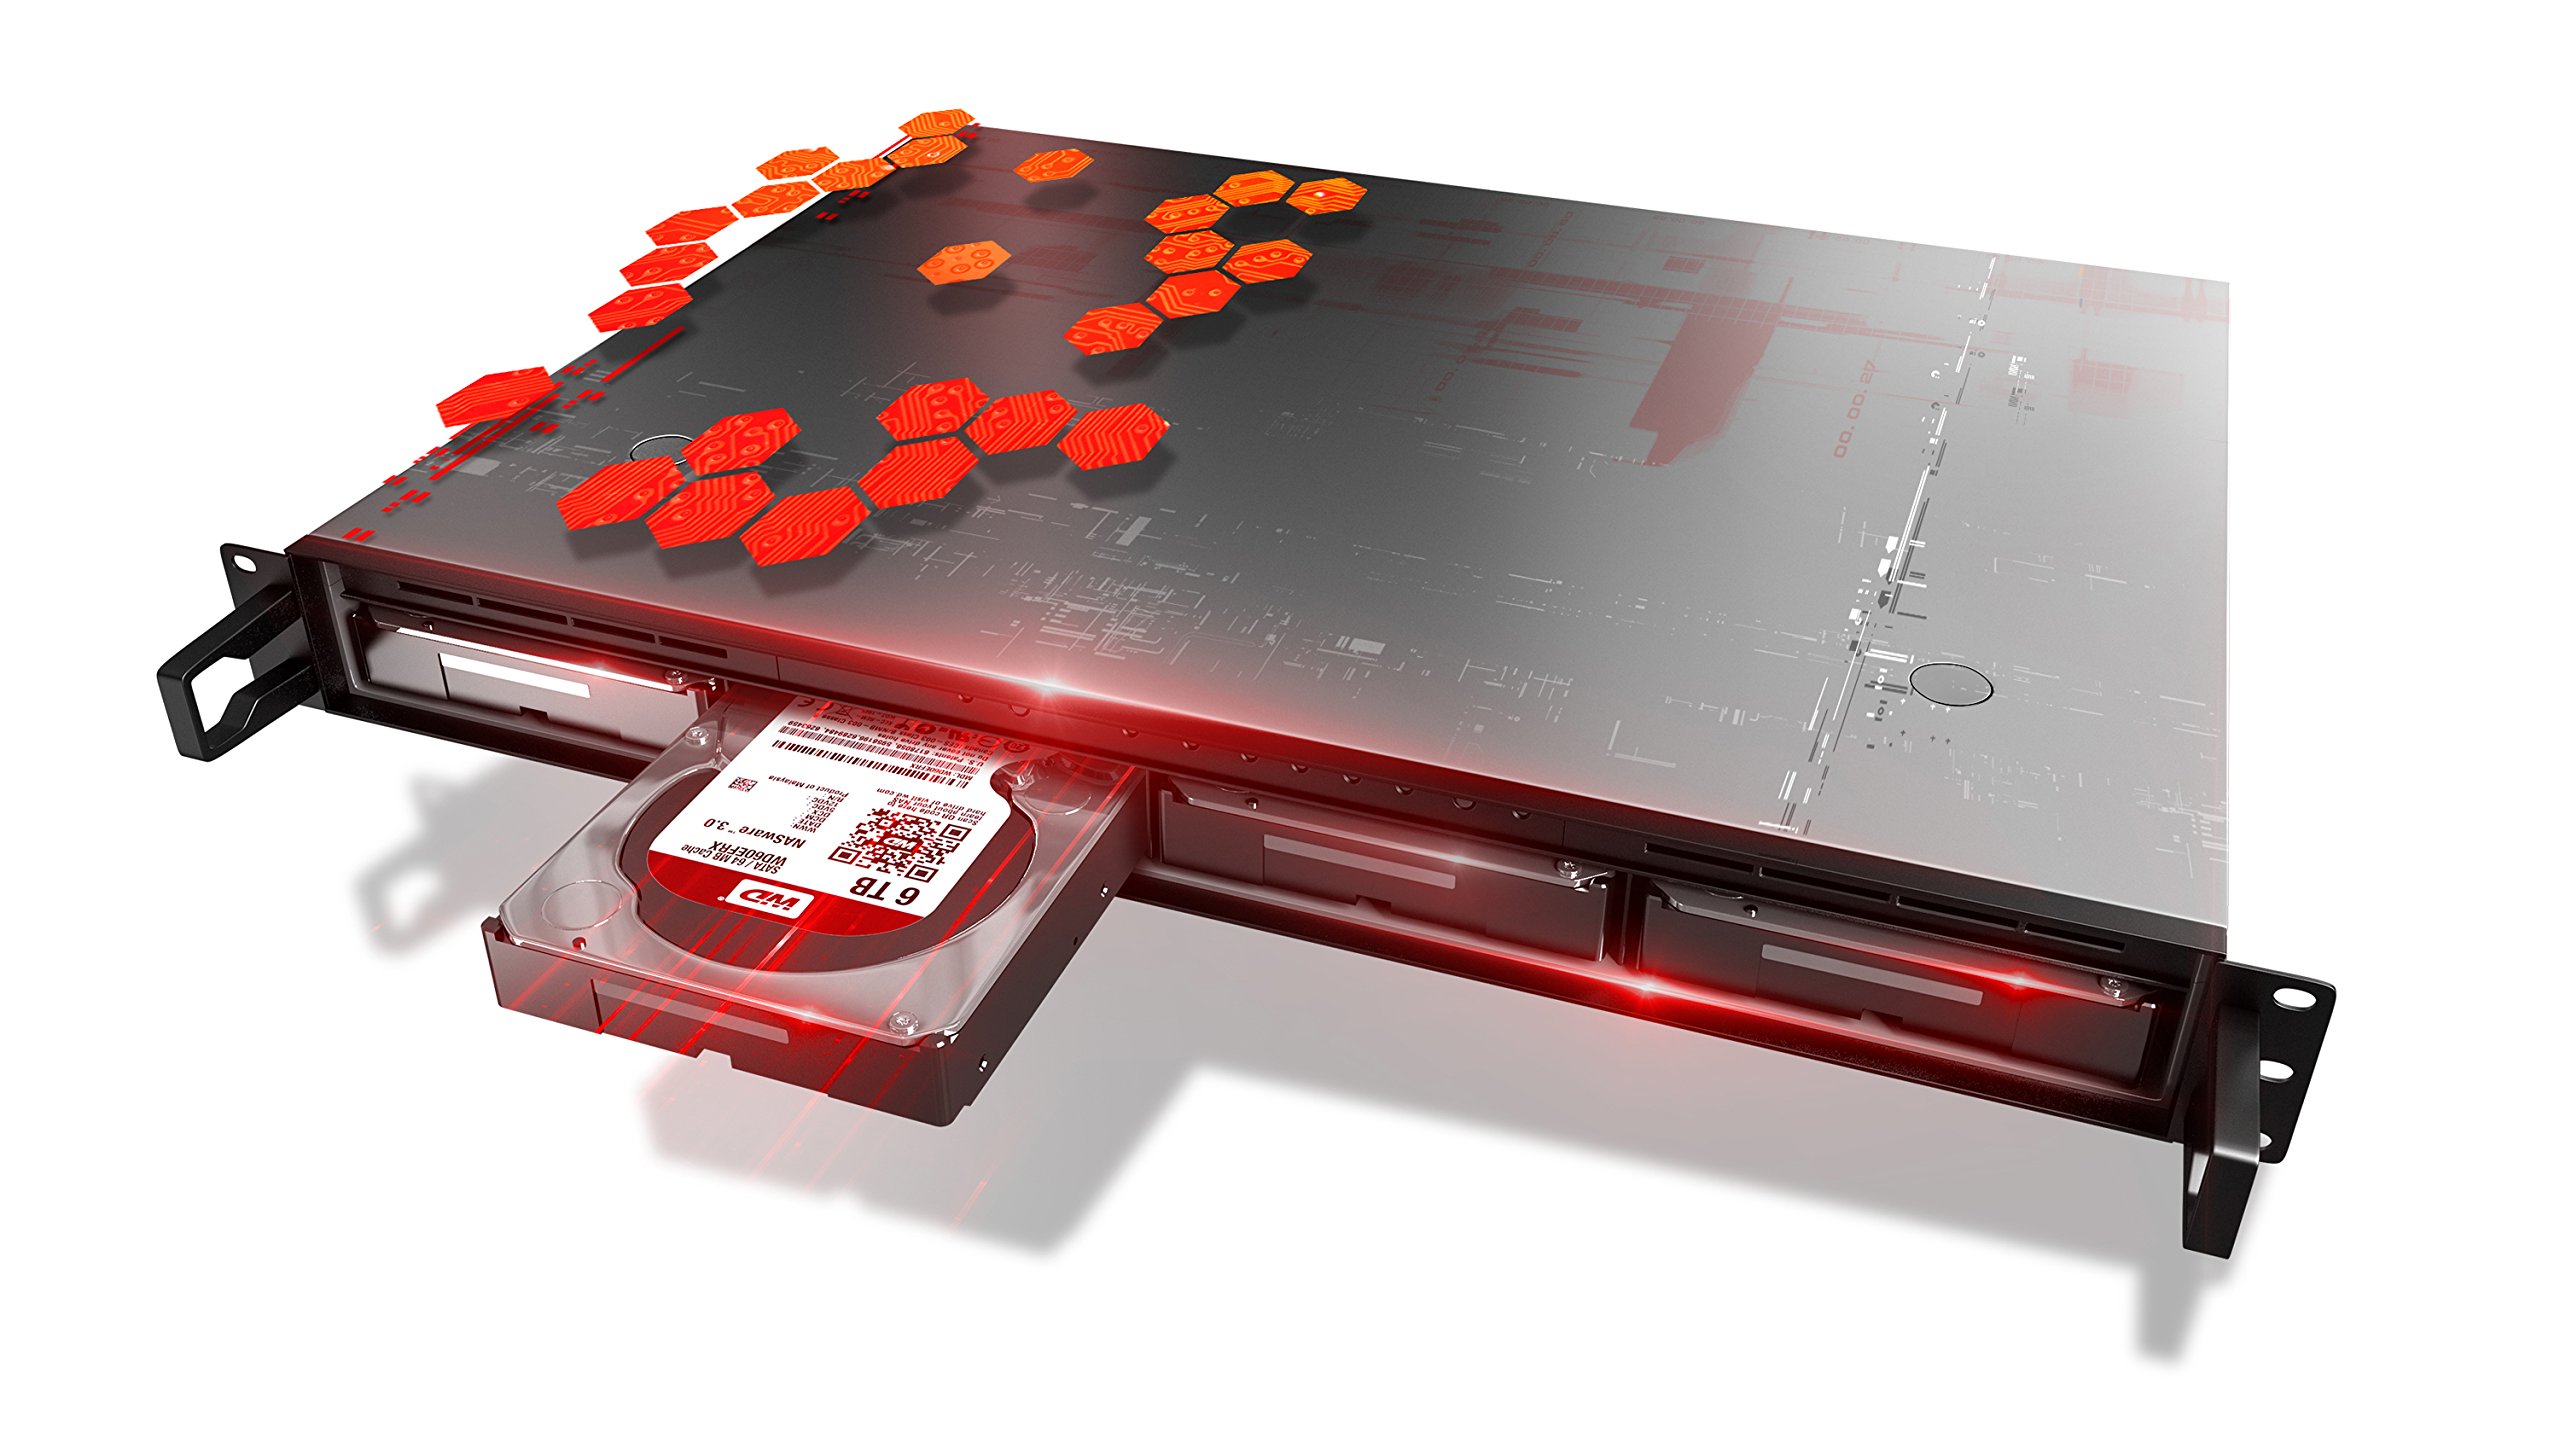 WD Red 8TB NAS Hard Disk Drive - 5400 RPM Class SATA 6 Gb/s 128MB Cache 3.5 Inch - WD80EFZX